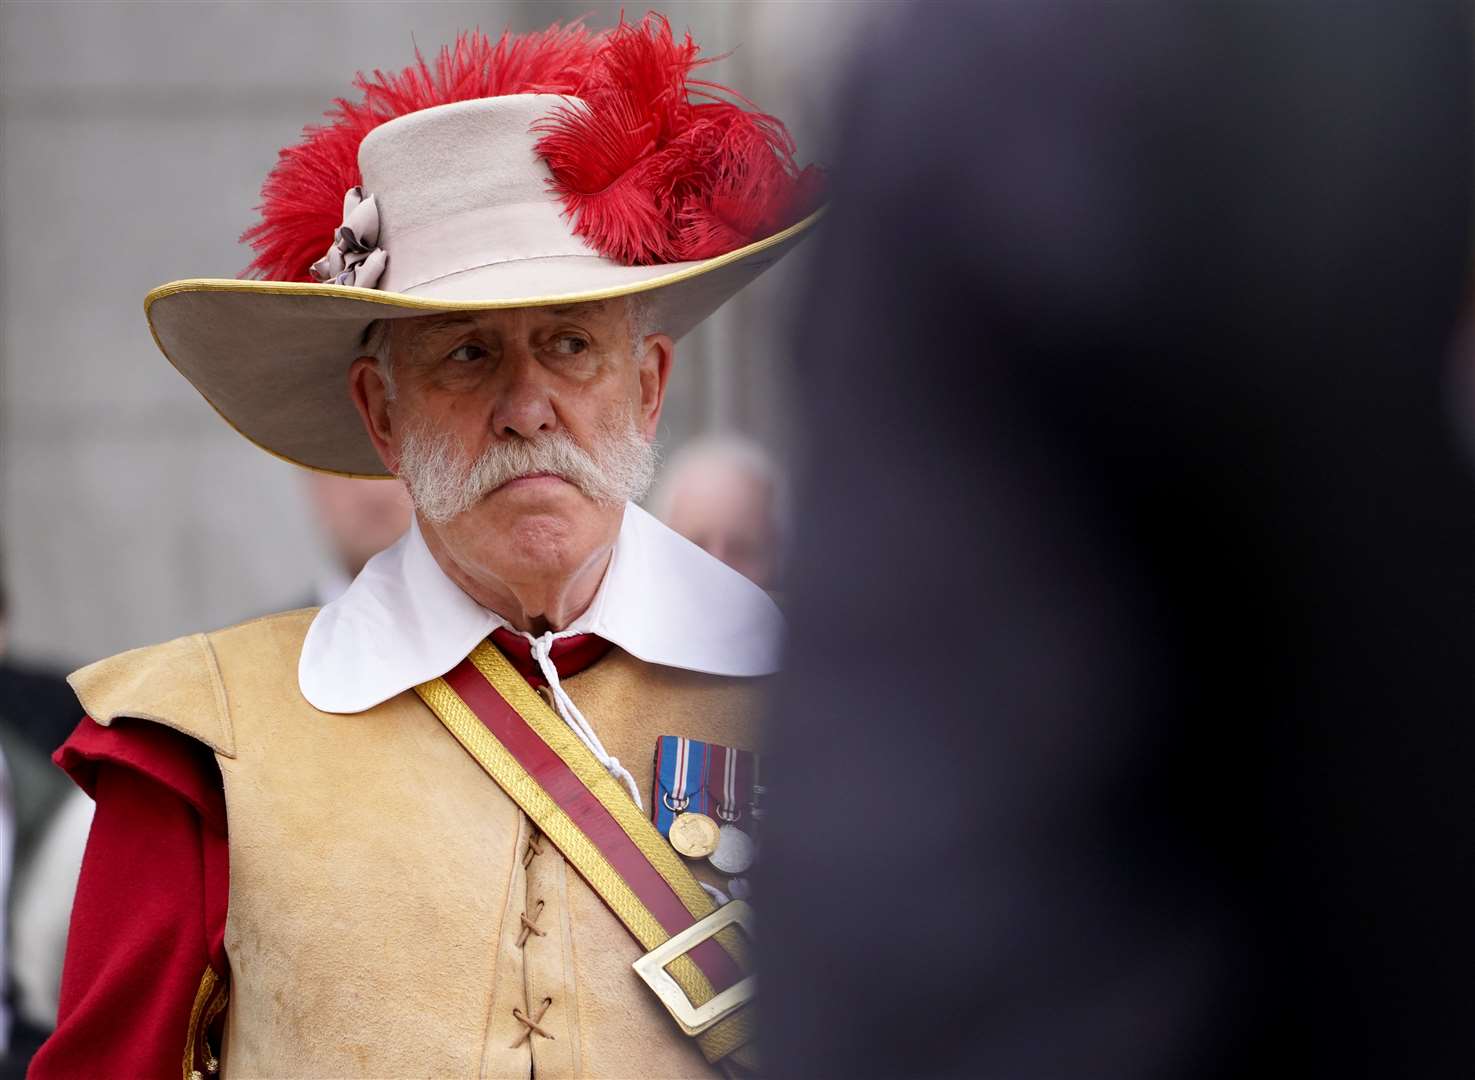 A Pikeman of the Honourable Artillery Company stands outside the Royal Exchange in the City of London, before the reading of the Proclamation of Accession there (James Manning/PA)